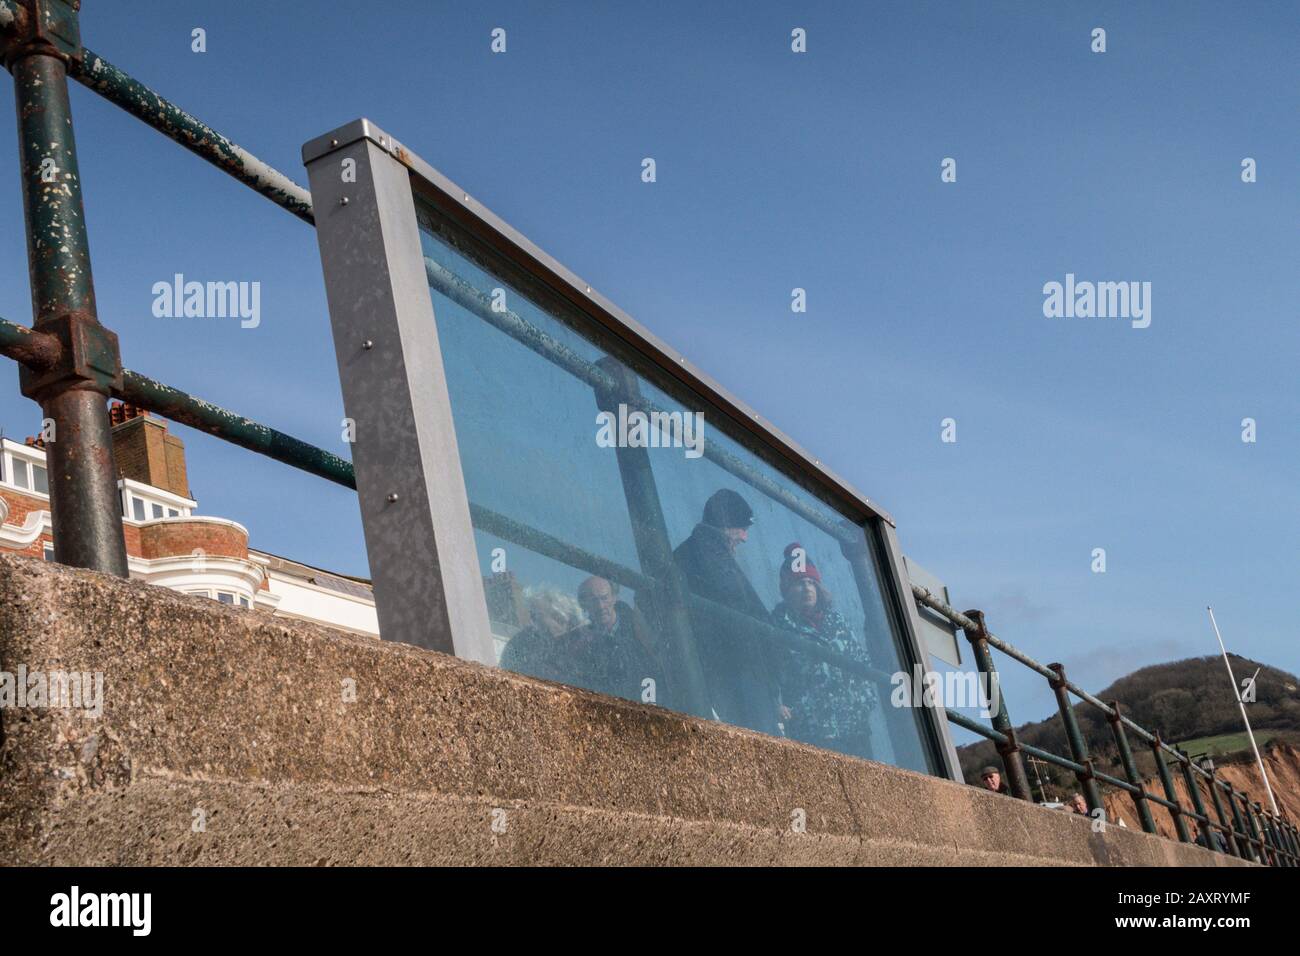 Glass sea defence panels installed on test on the sea wall at Sidmouth, Devon, withstood the full battering of storm Ciara. Stock Photo